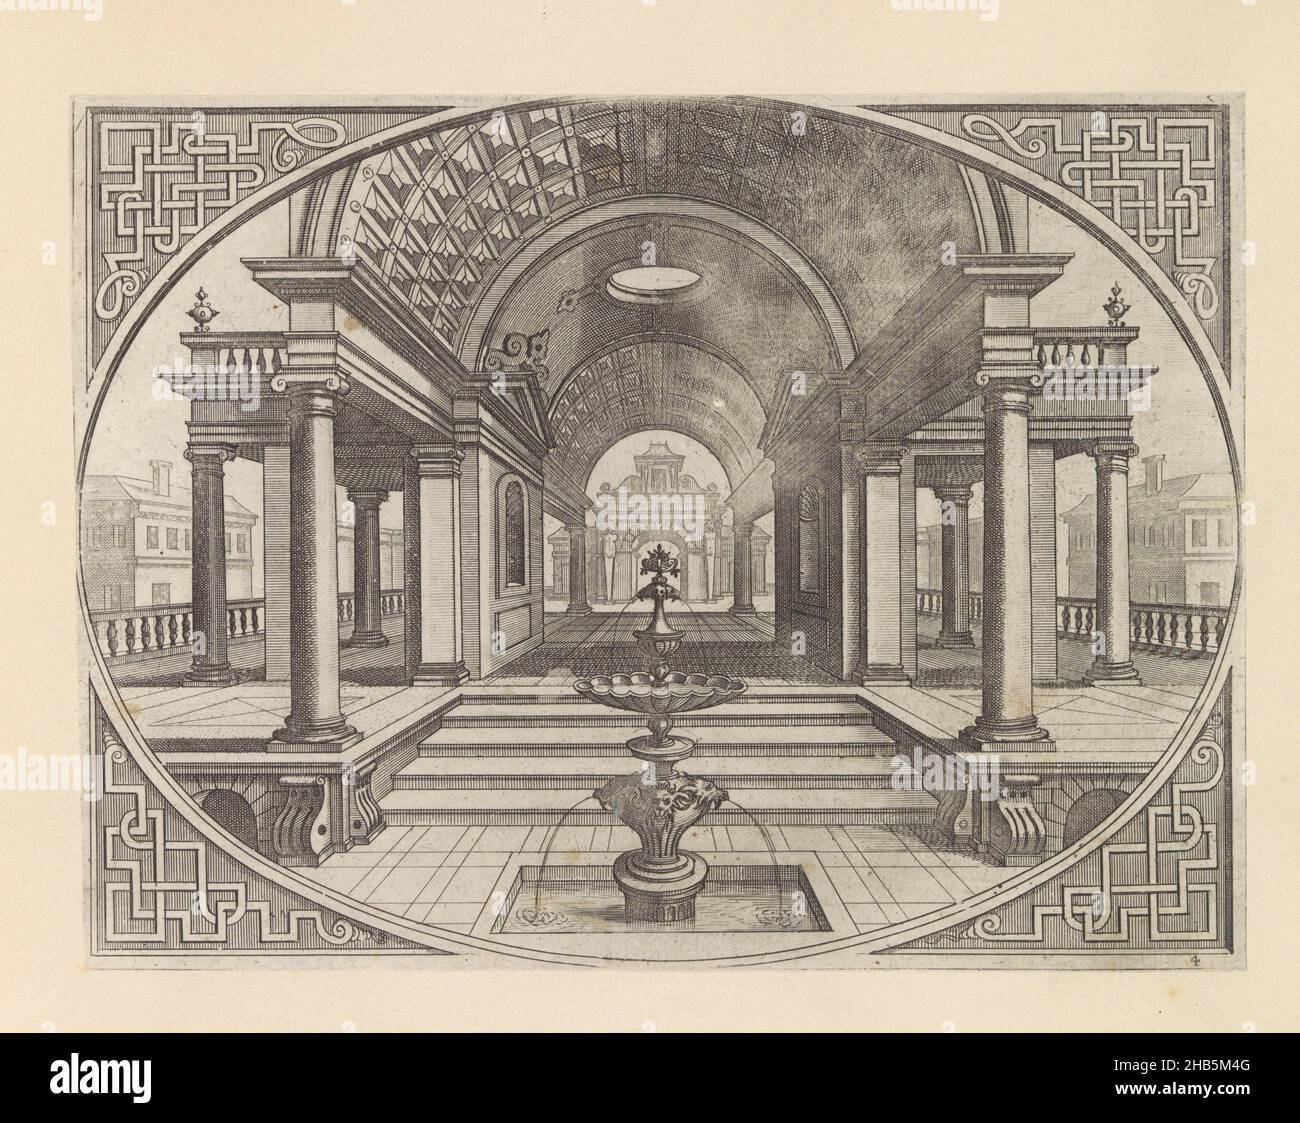 Open hall with tunnel vault and fountain in the foreground, Variae Architecturae Formae (...) (series title), Architectural perspectives in oval frames for intarsia (series title), Open hall with a tunnel vault. The front and rear parts of the vault are decorated with cassettes. In the center is an oculus. In the foreground a fountain. The print is part of an album., print maker: Johannes of Lucas van Doetechum, Hans Vredeman de Vries, Antwerp, after 1601, paper, etching, height 162 mm × width 214 mm Stock Photo